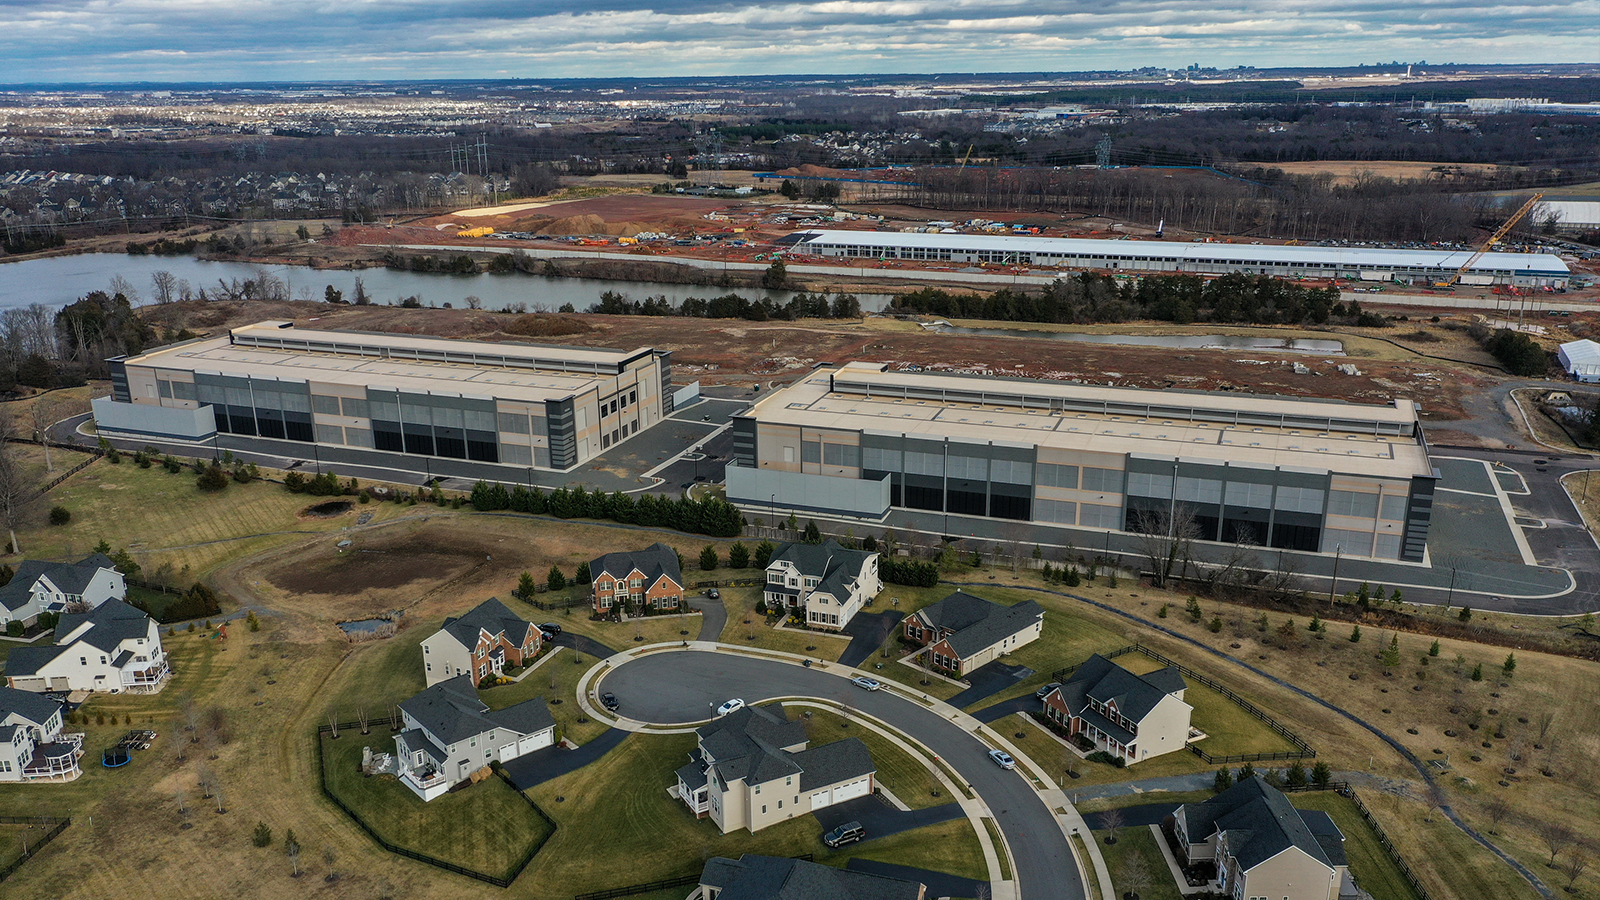 Amazon data centers being built 50 feet from residential houses in the Loudoun County, Virginia.